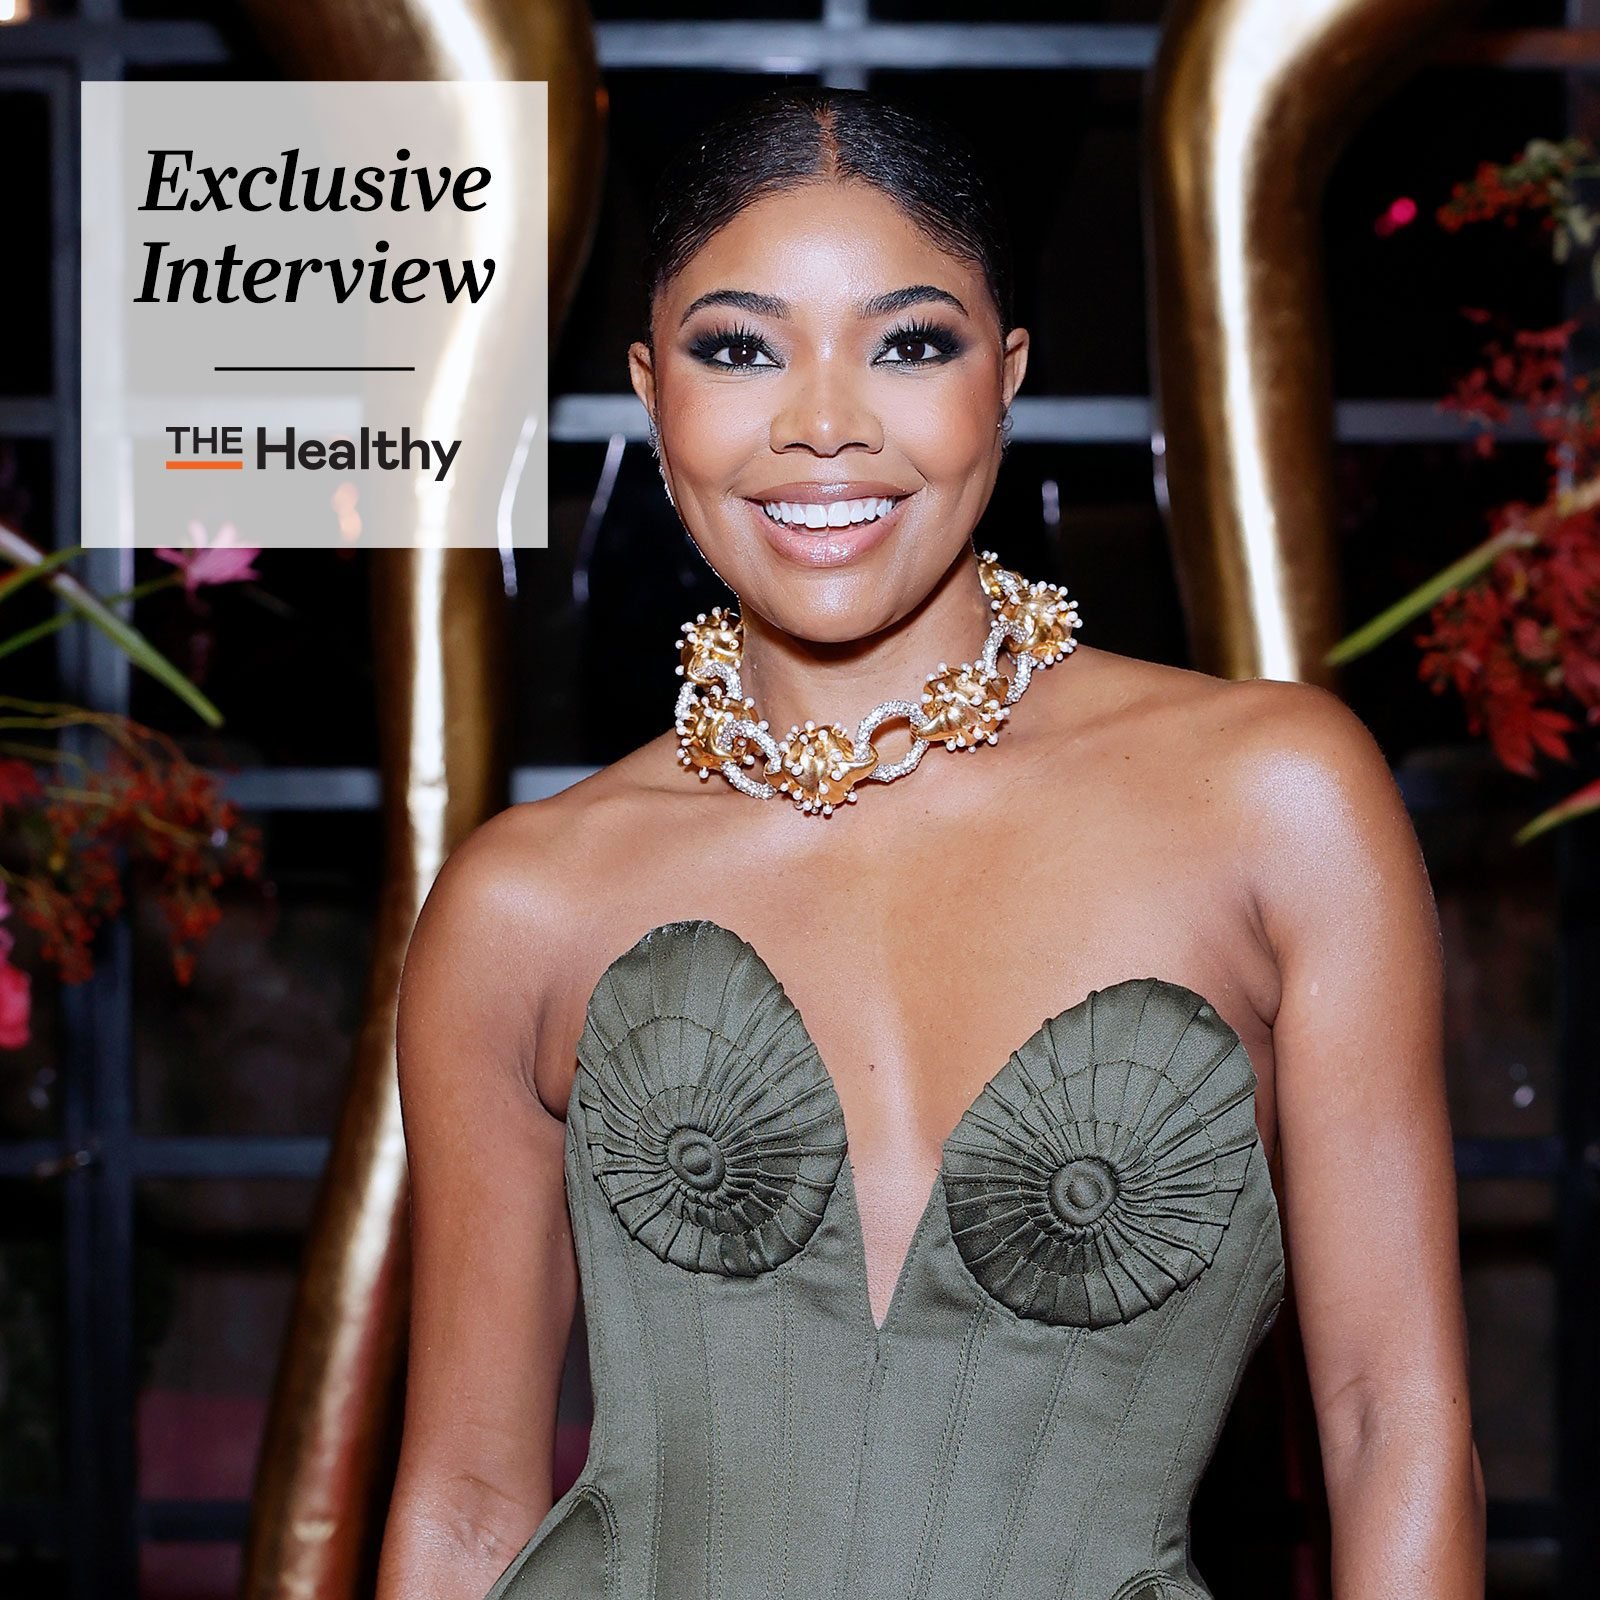 Gabrielle Union Gets Candid About Menopause: "I Feel Like Radical Transparency Has Really Helped"